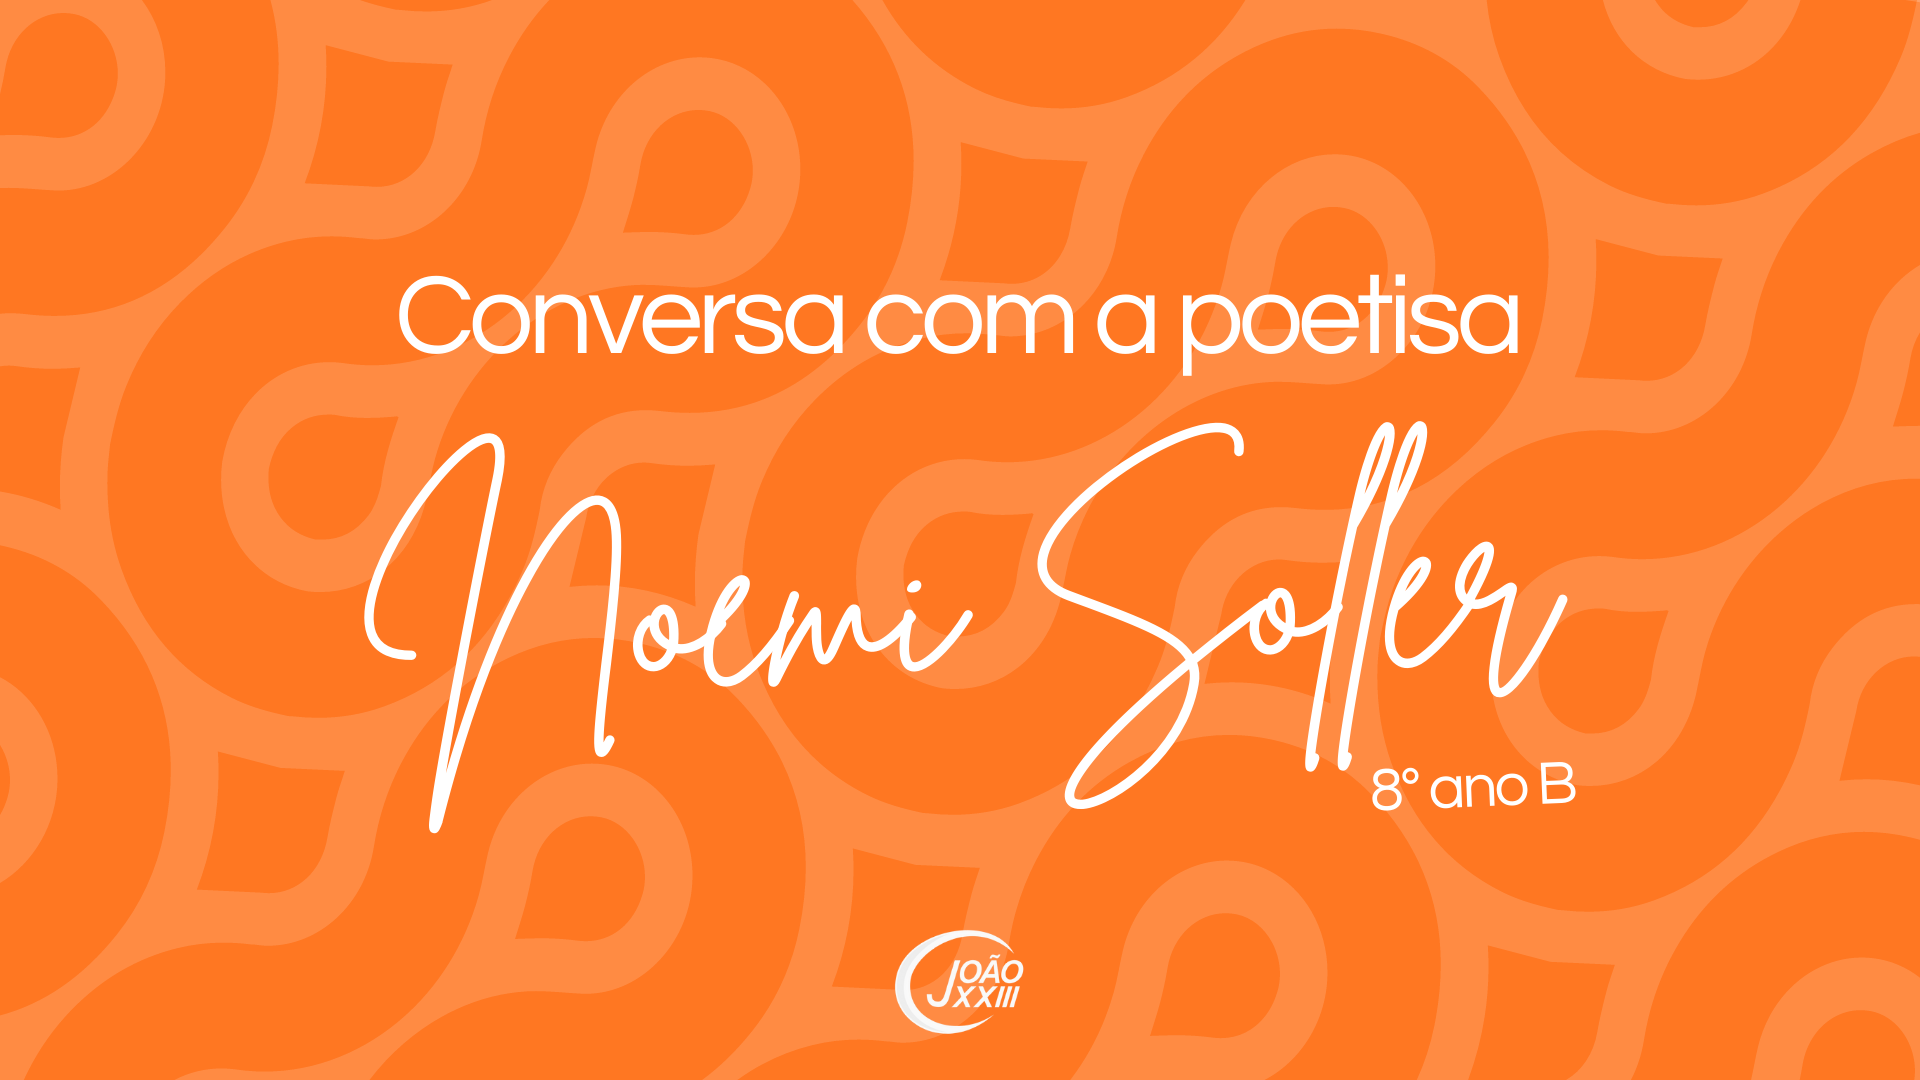 You are currently viewing Conversa com a poetisa Noemi Soller